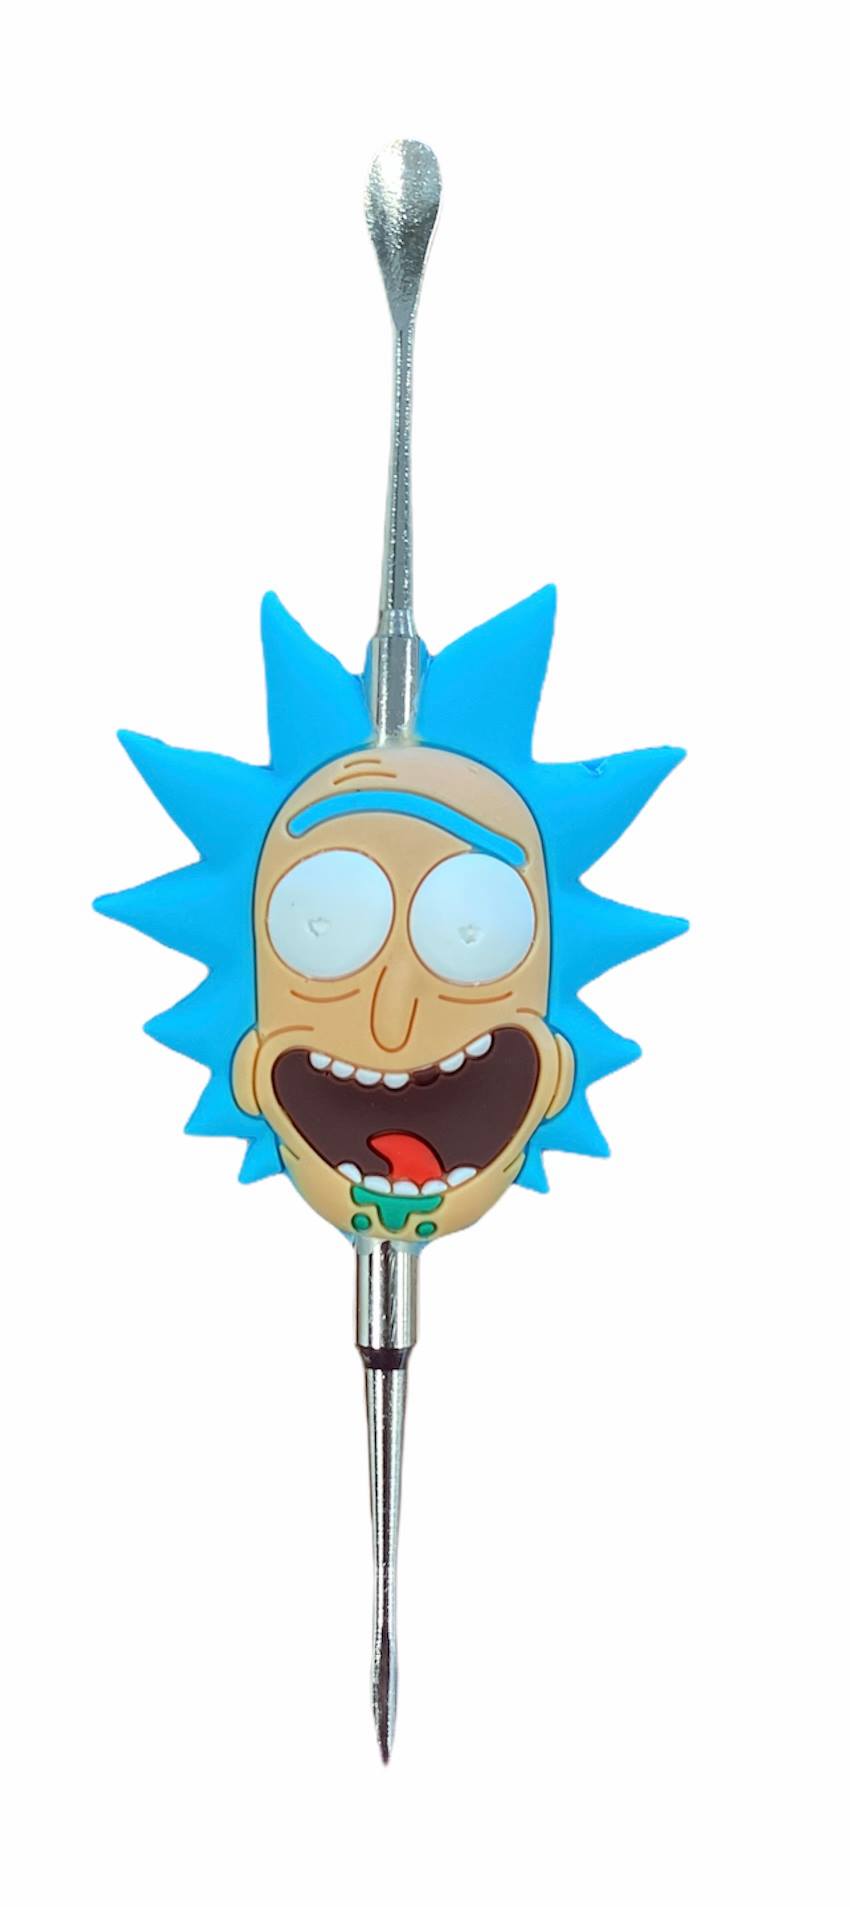 METAL / SILICONE DABBER TOOL, RICK AND MORTY DESIGN B | SINGLE UNIT